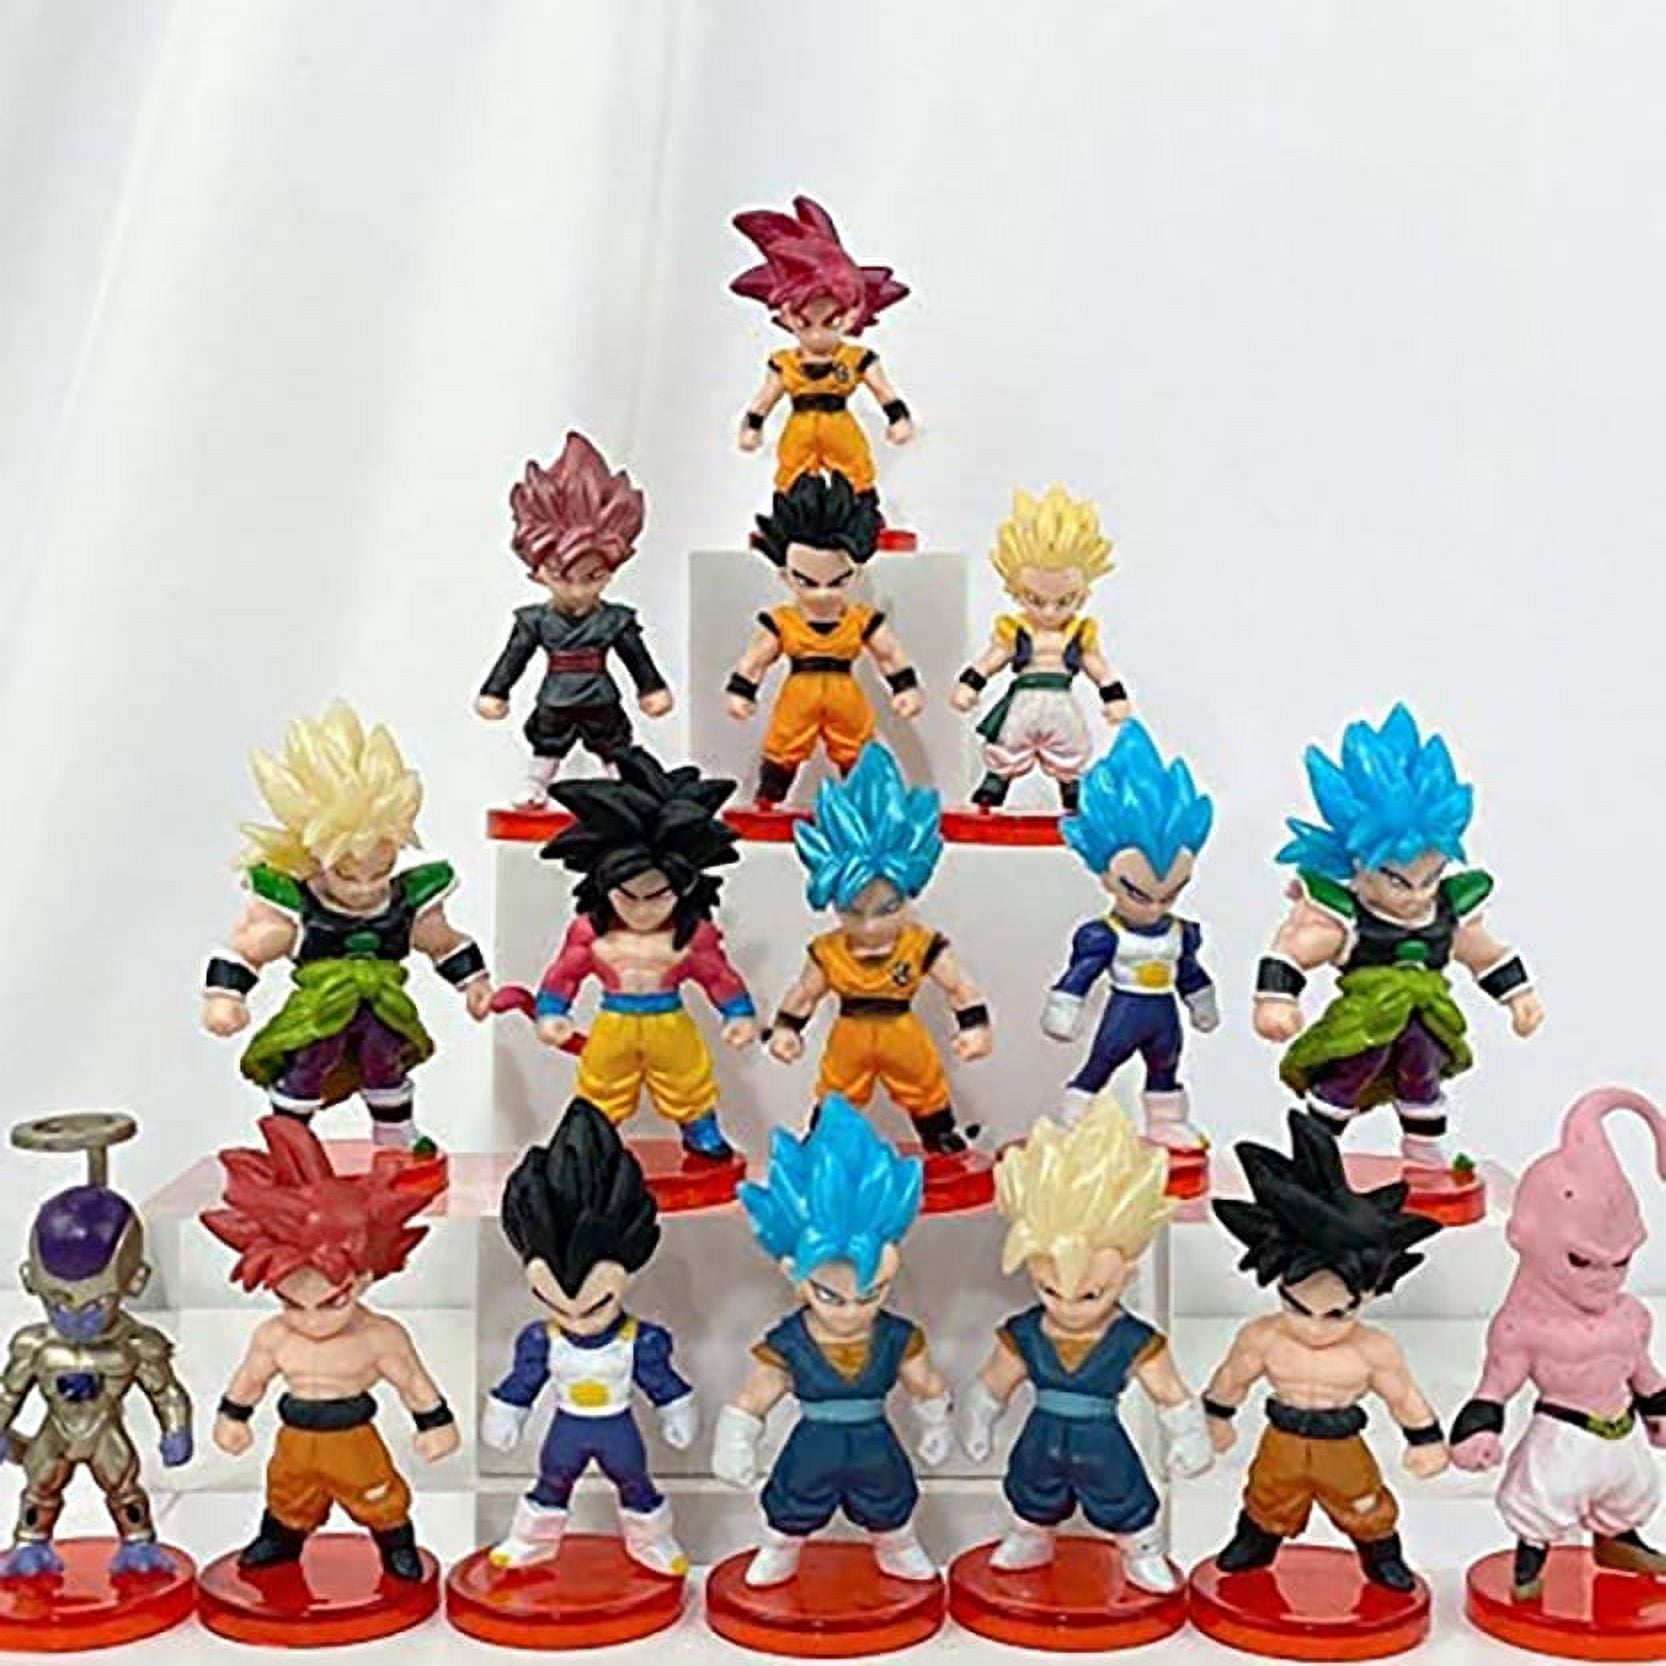 Funko Pop! Dragon Ball Z - Cell First Form Glow in the Dark #947